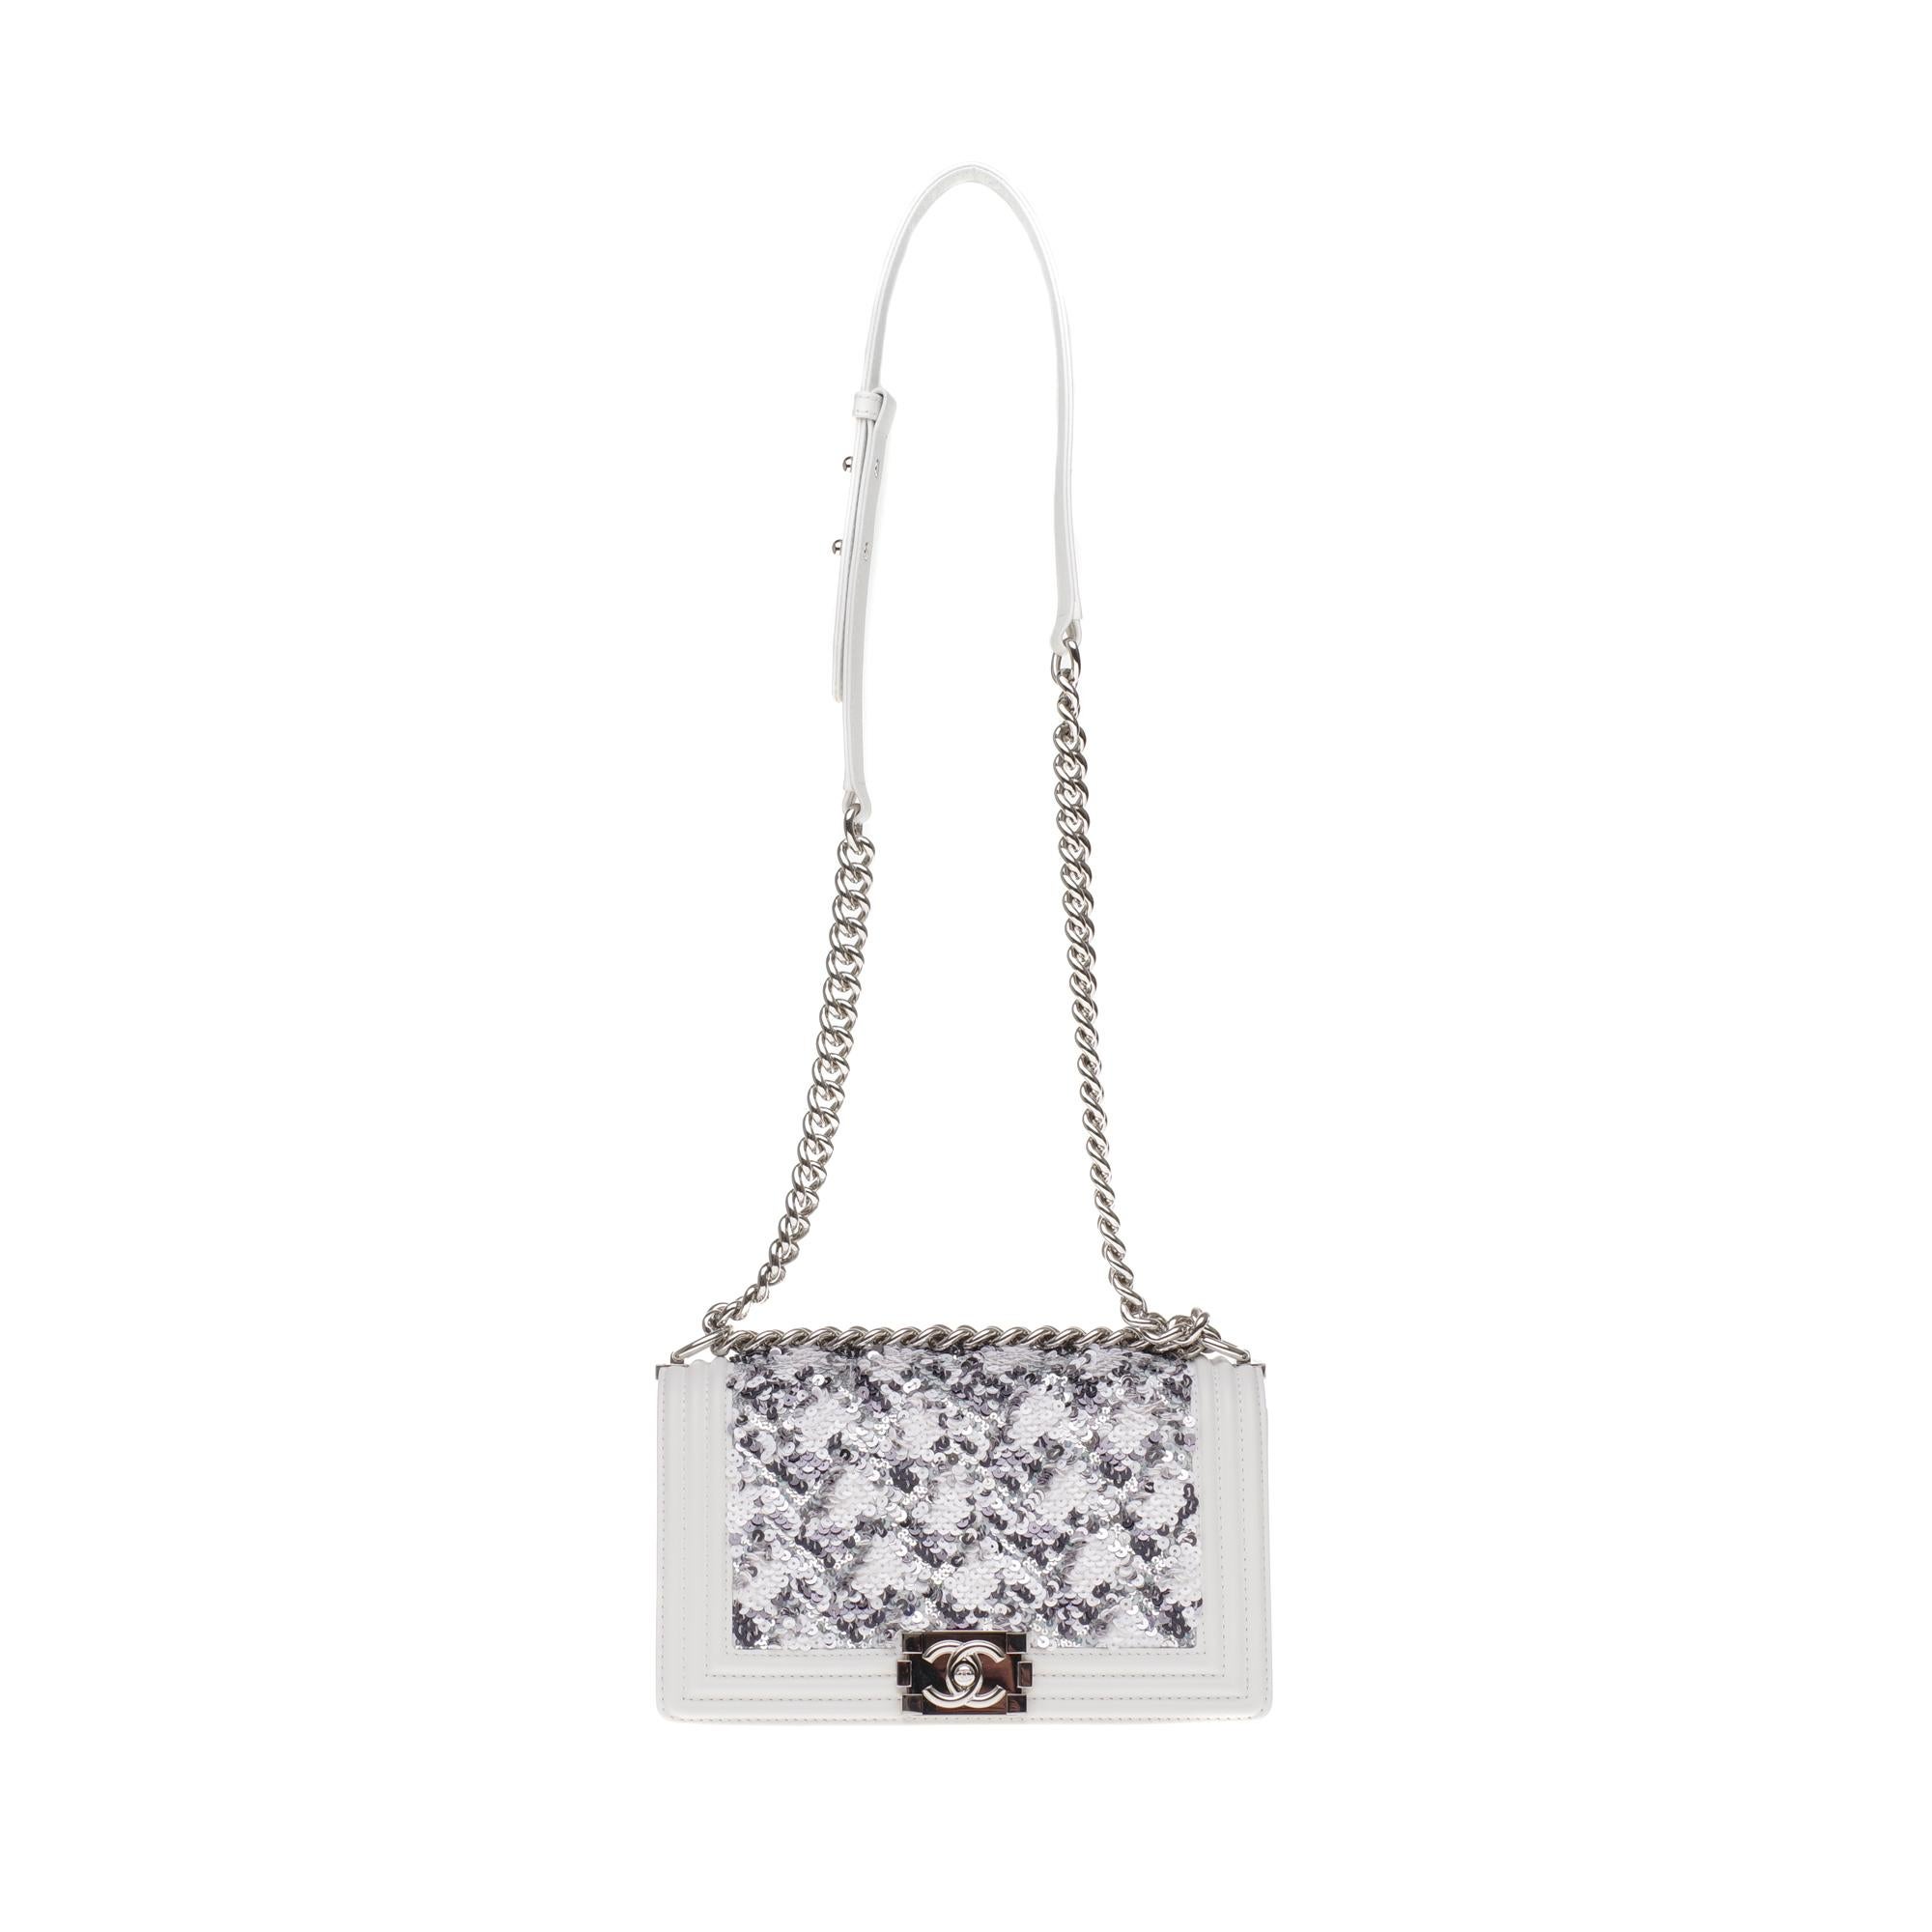 Ultra rare - Limited Edition sequins Chanel boy


Splendide & Rare Chanel Boy shoulder bag in matte white leather with white and grey sequin, shiny silver metal trim, an adjustable silver metal chain handle for shoulder or crossbody.


A logo